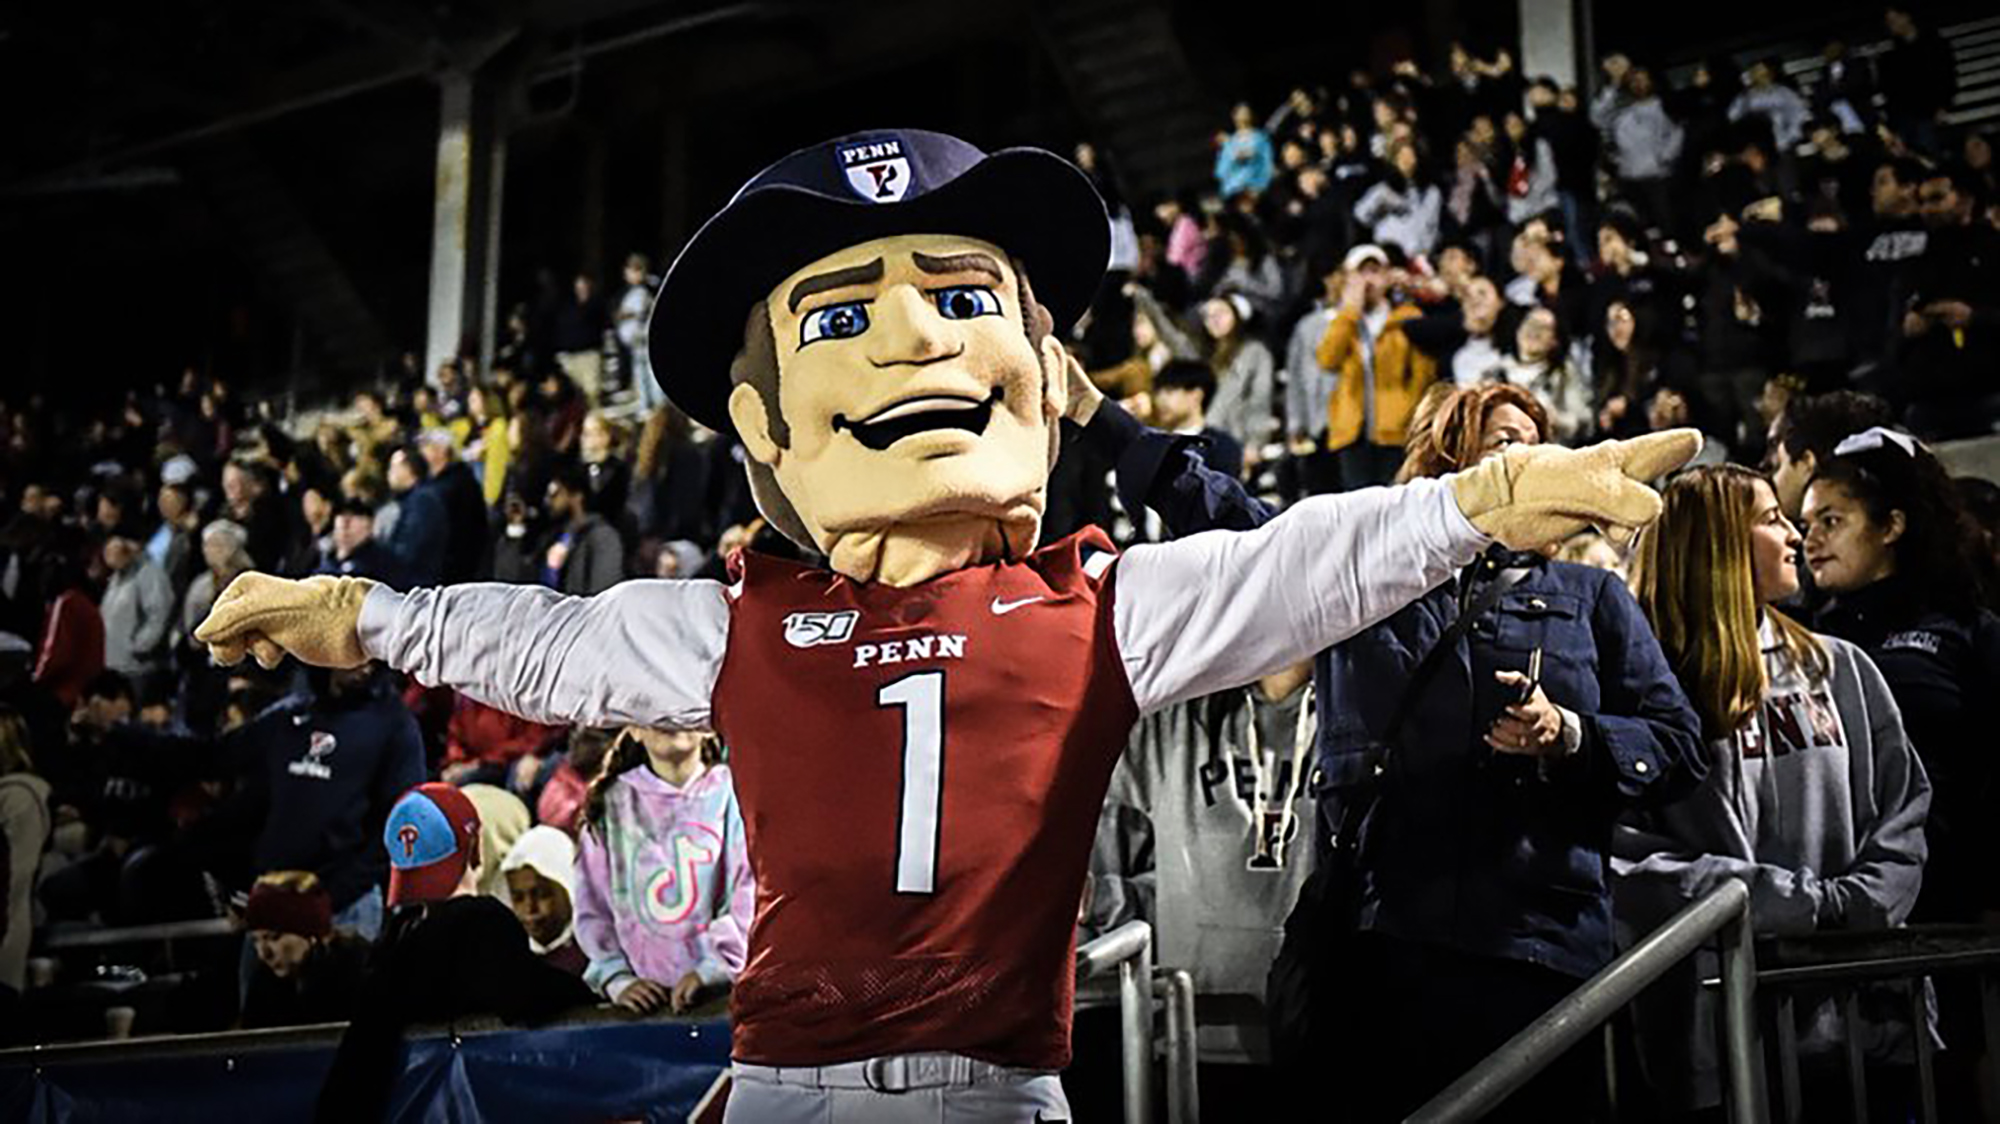 The new Quaker mascot poses with his arms outstretched in the stands at Franklin Field.